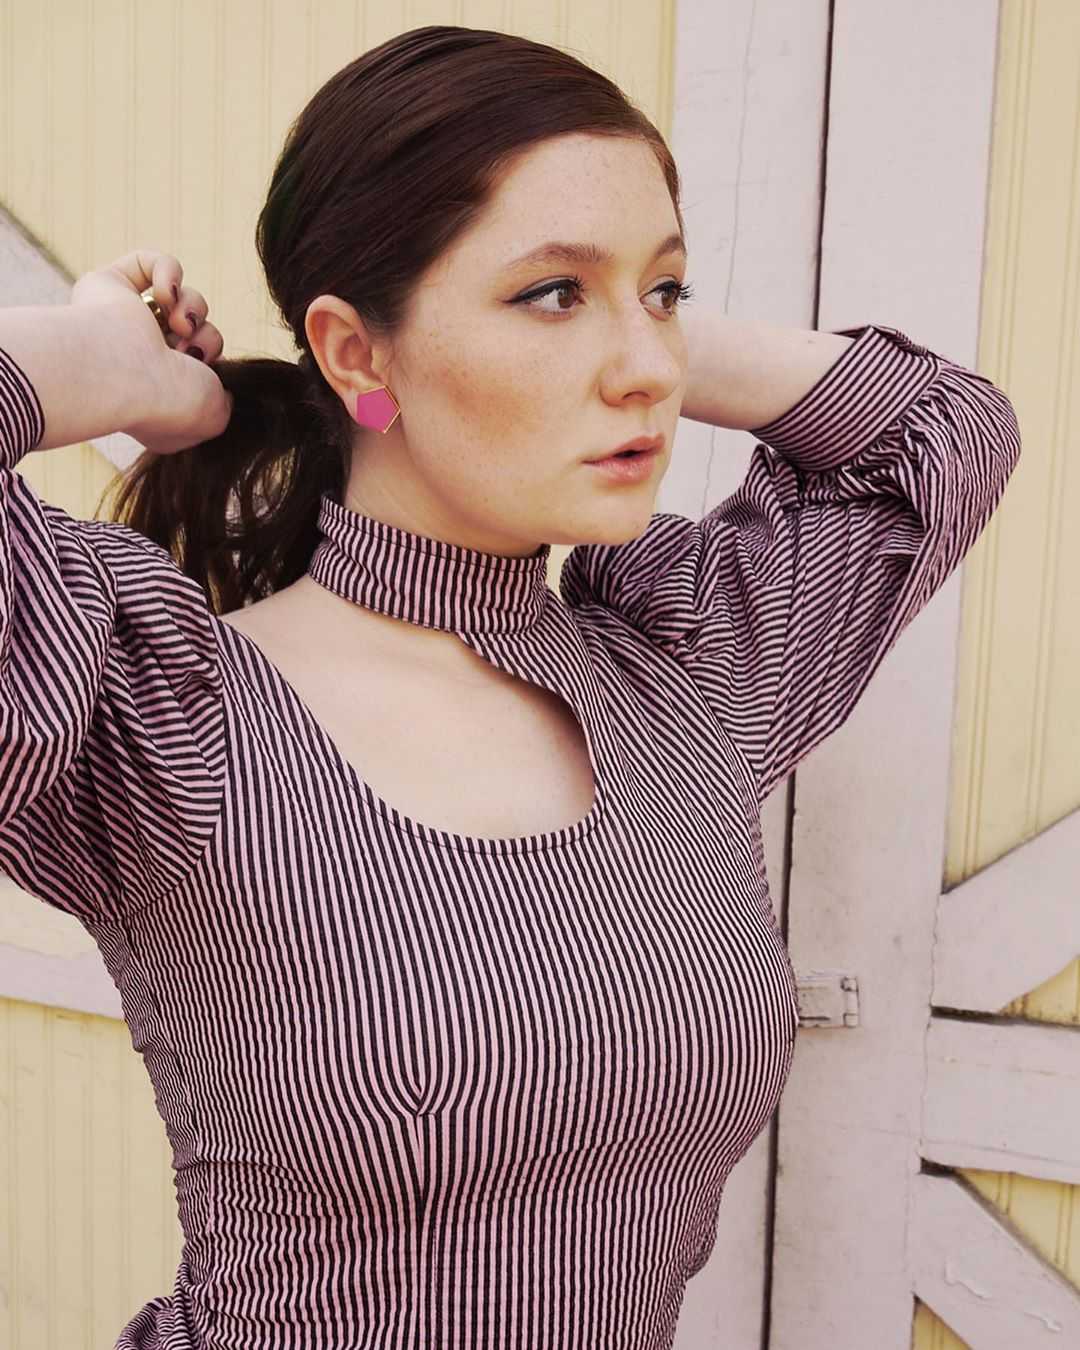 70+ Hot Pictures Of Emma Kenney From Shameless 30